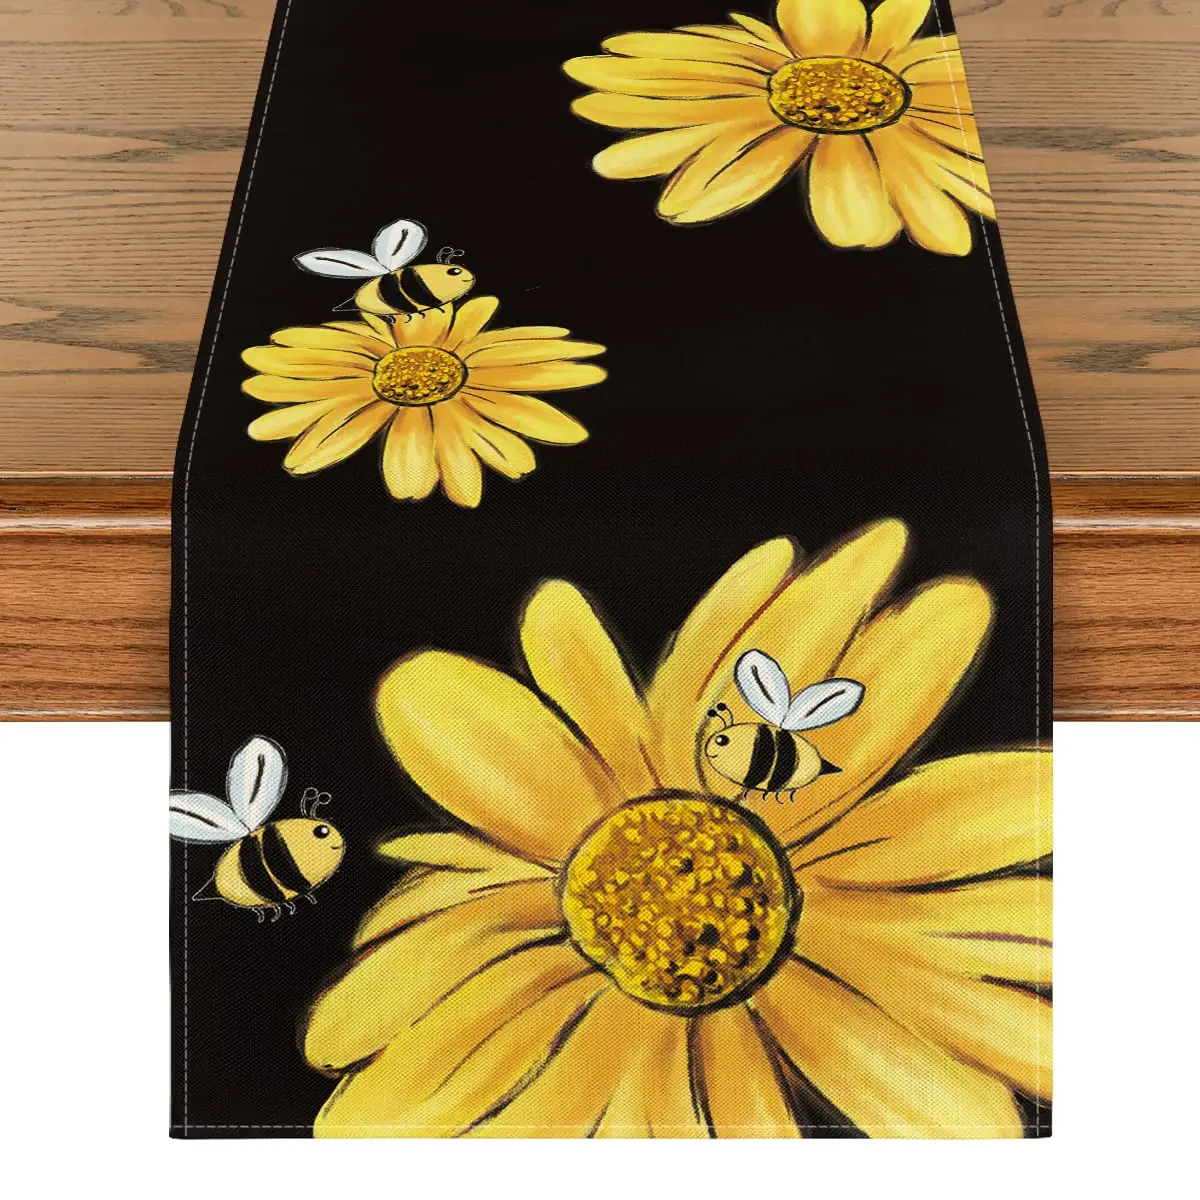 

Bee Sunflower Table Runner Black, Seasonal Flowers Holiday Kitchen Dining Table Decor for Home Party Decor 13 x 72 Inch